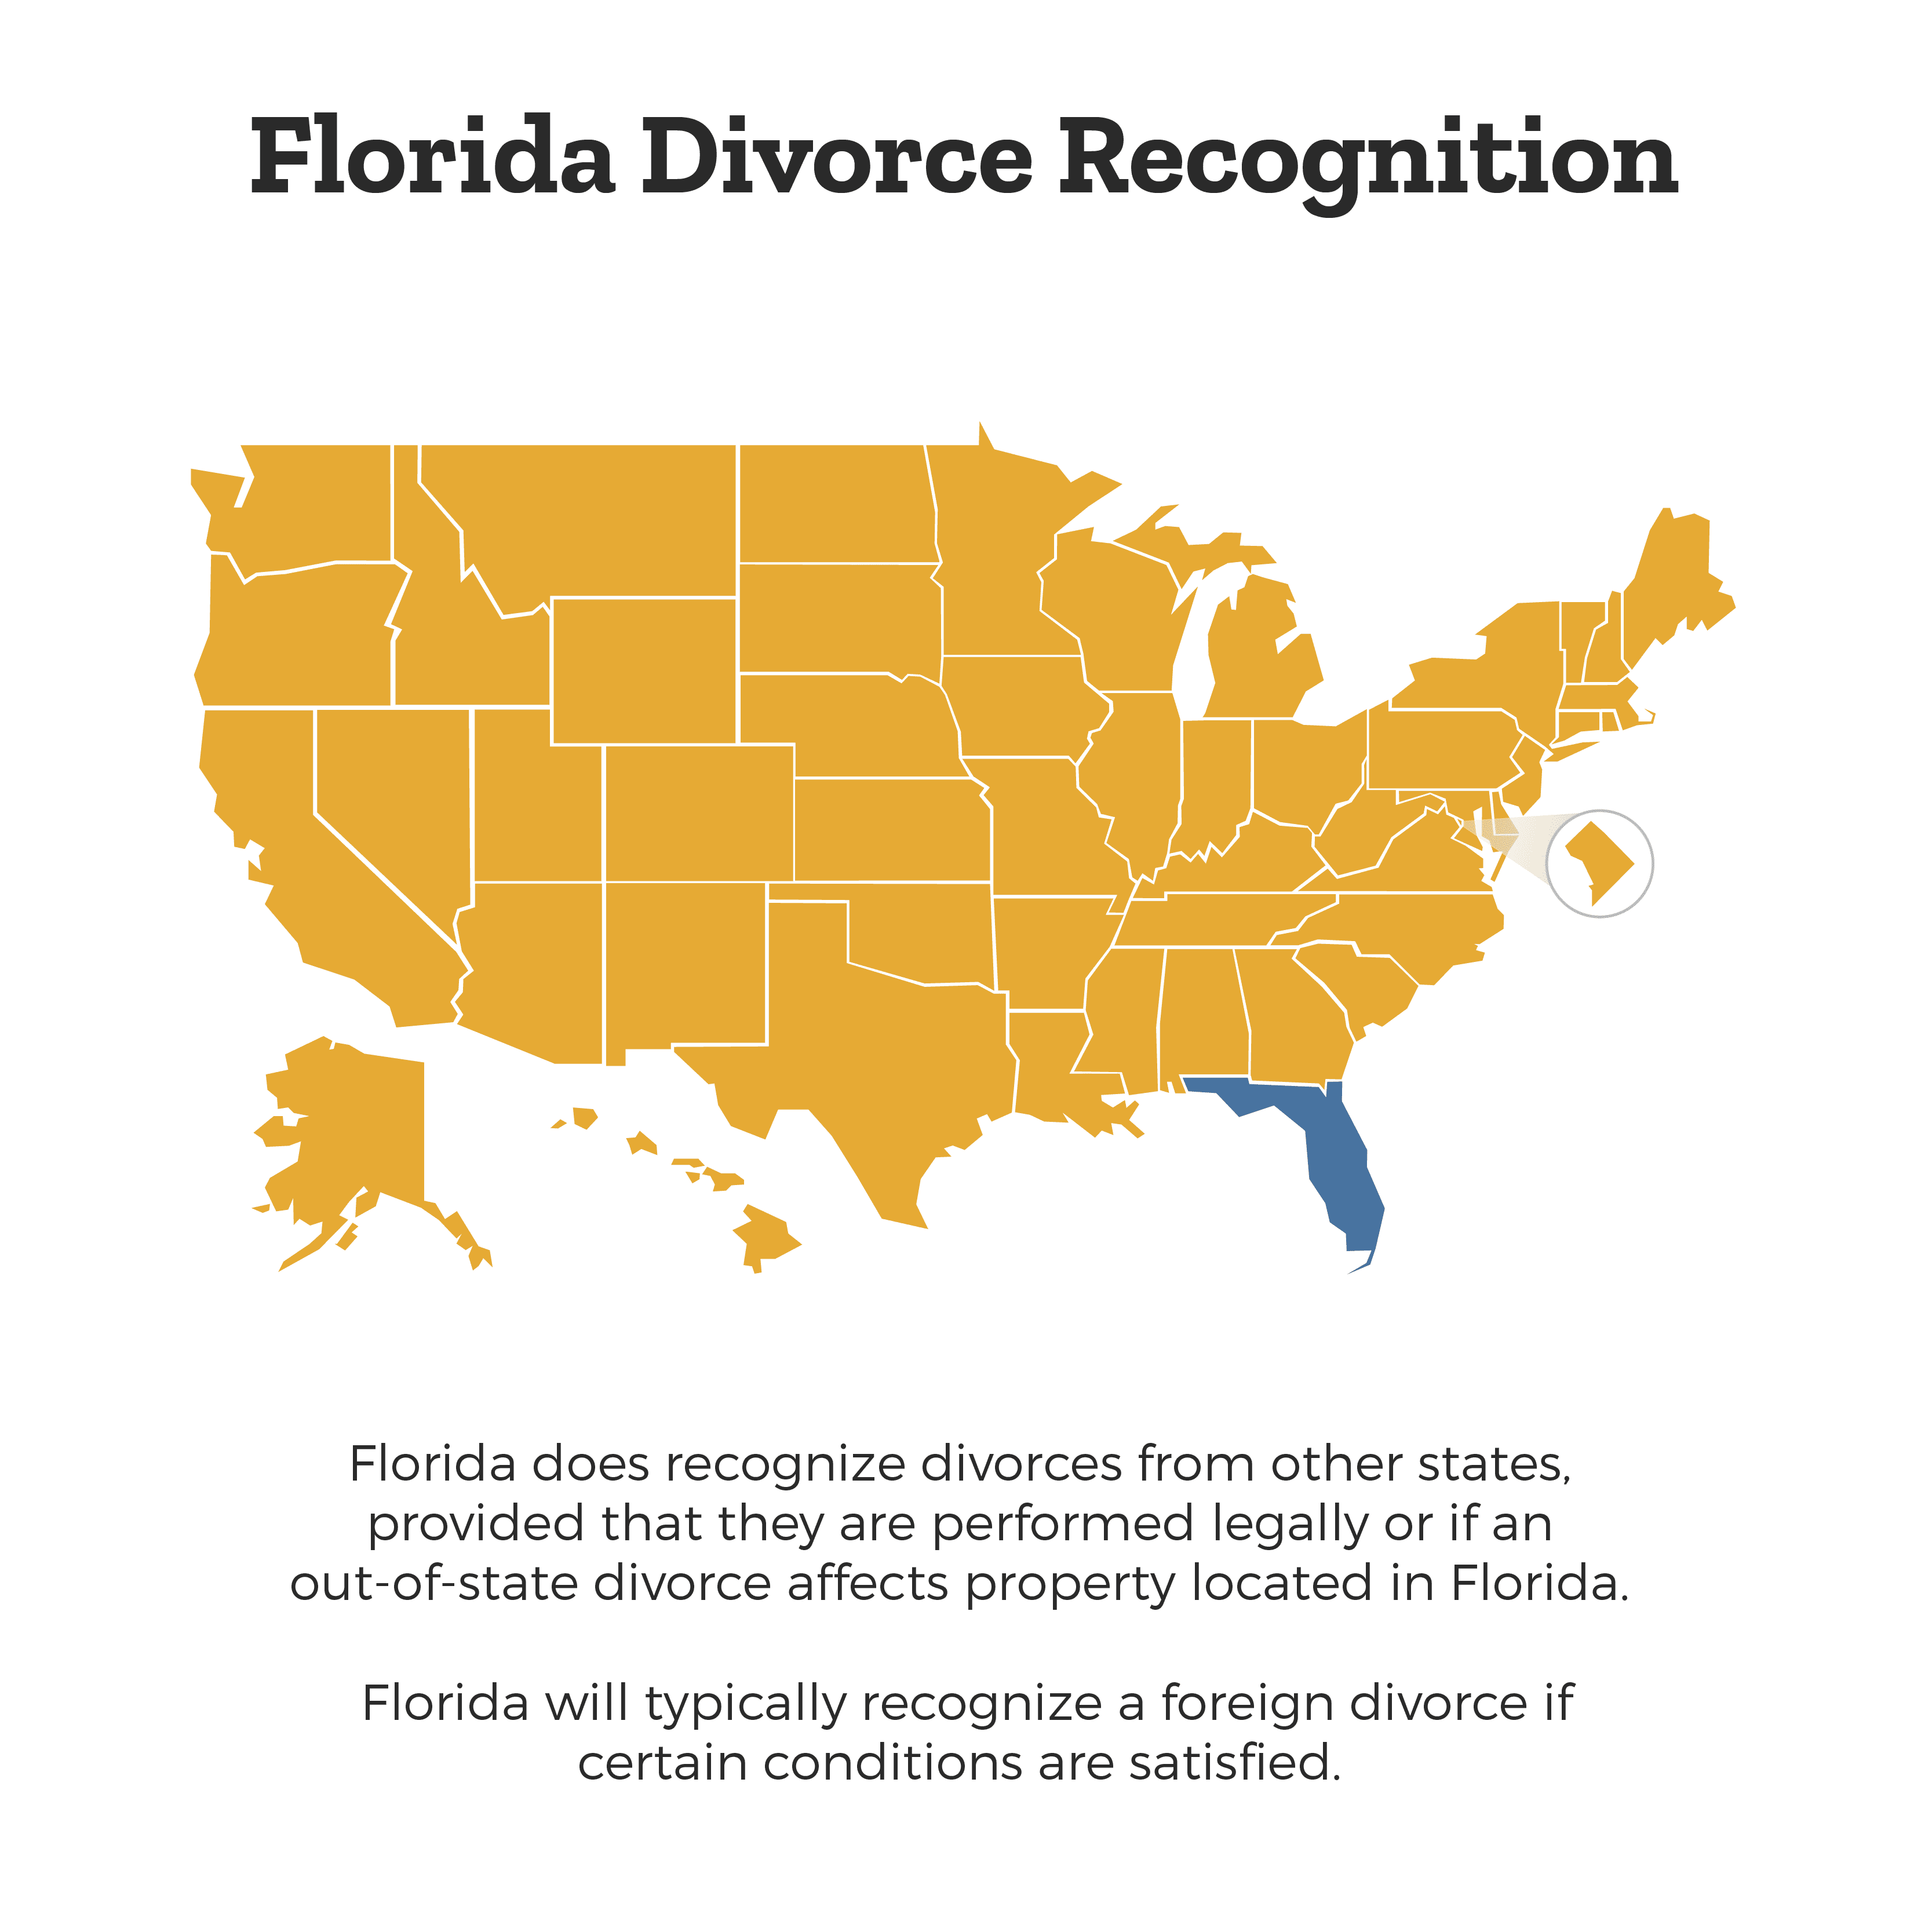 florida-recognizes-divorces-from-other-states-and-countries-if-certain-conditions-are-satisfied